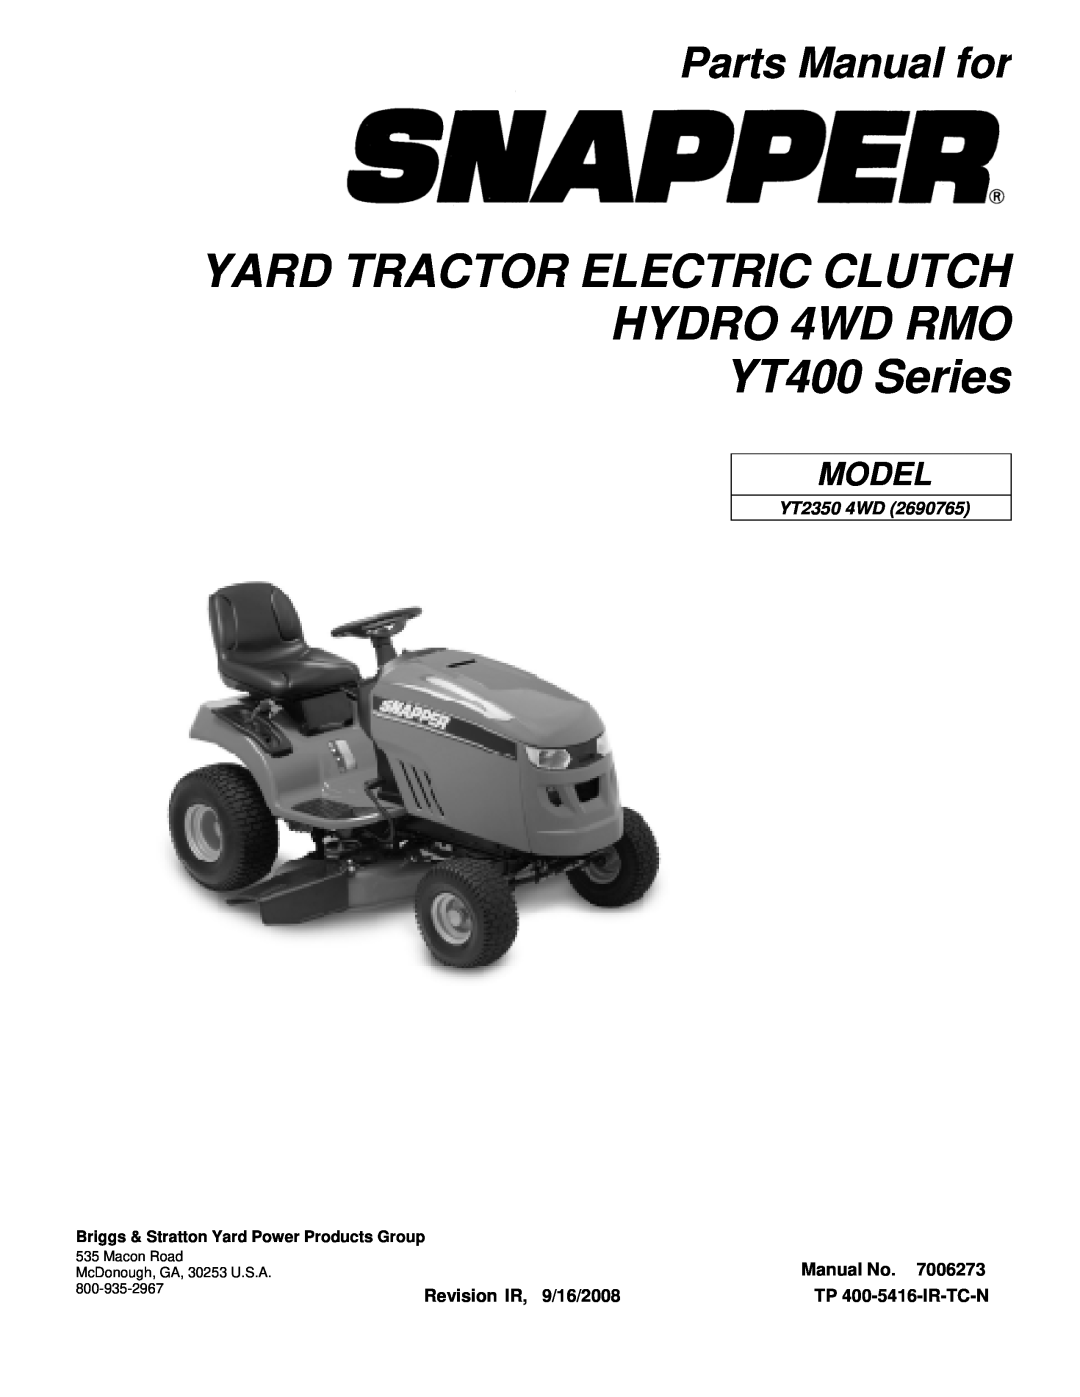 Snapper YT2350 4WD manual Parts Manual for, Model, Briggs & Stratton Yard Power Products Group, Macon Road 